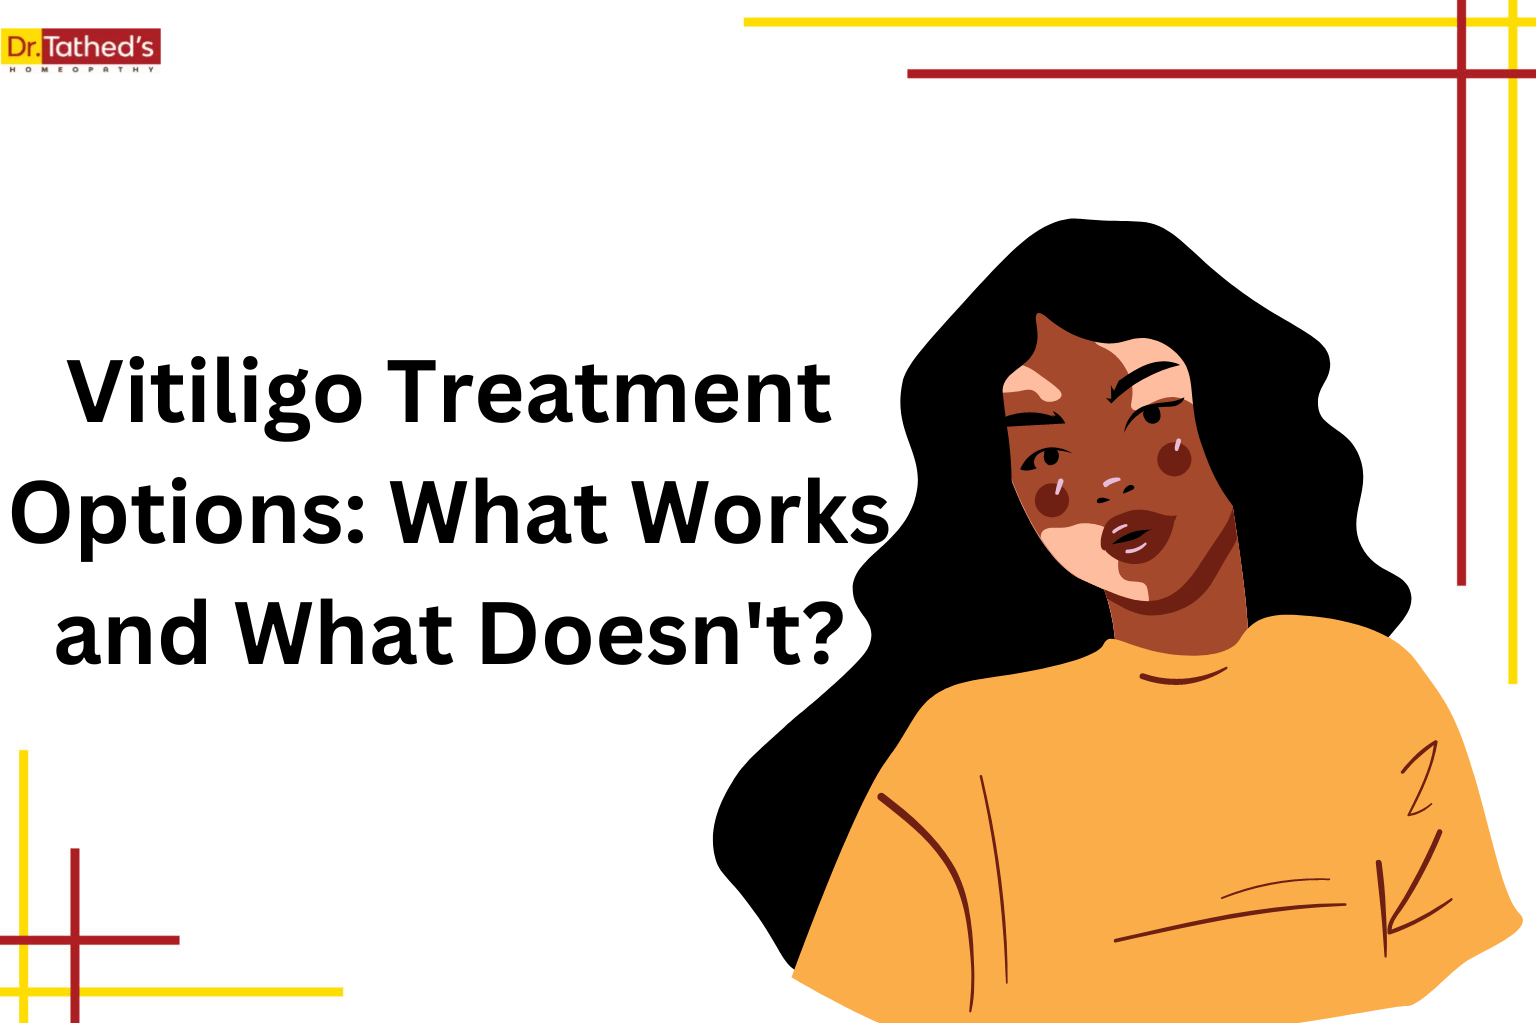 Vitiligo Treatment Options: What Works and What Doesn't?